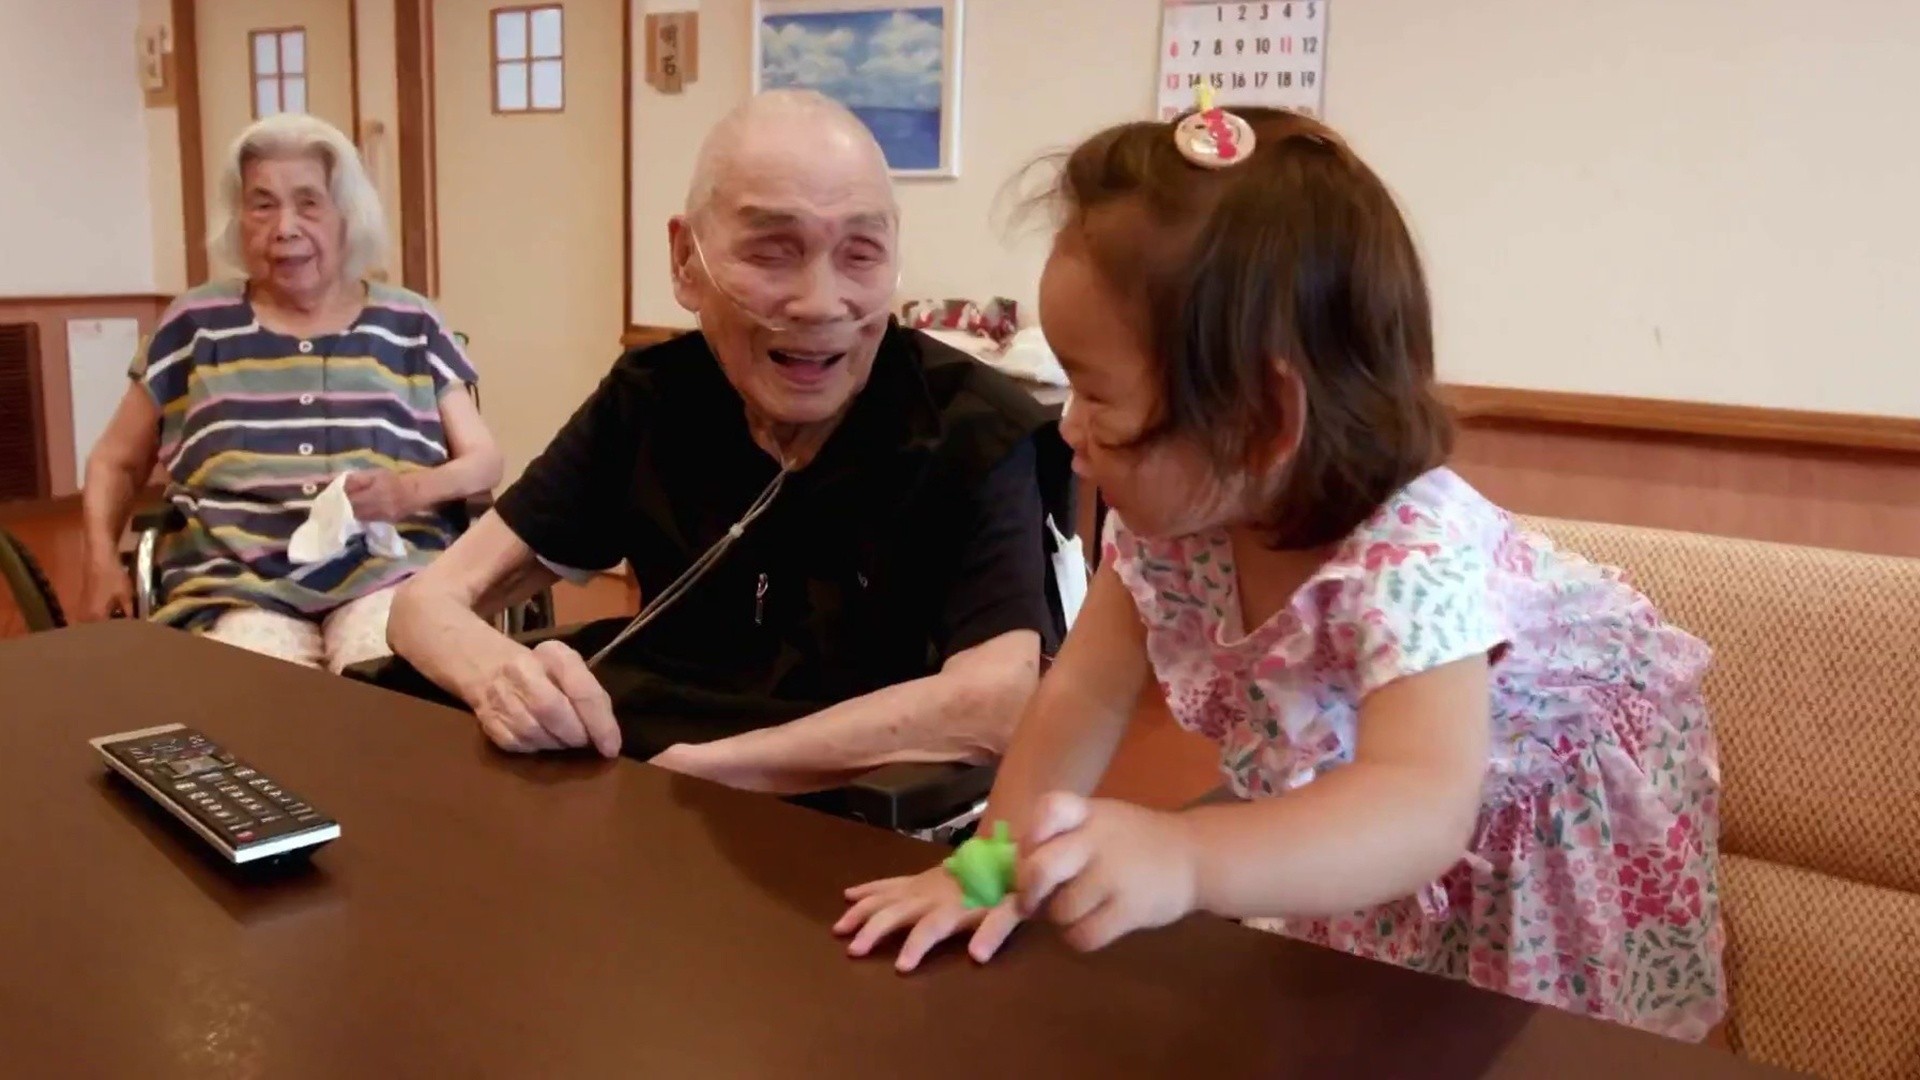 Japanese nursing home hires toddlers to spend time with elderly